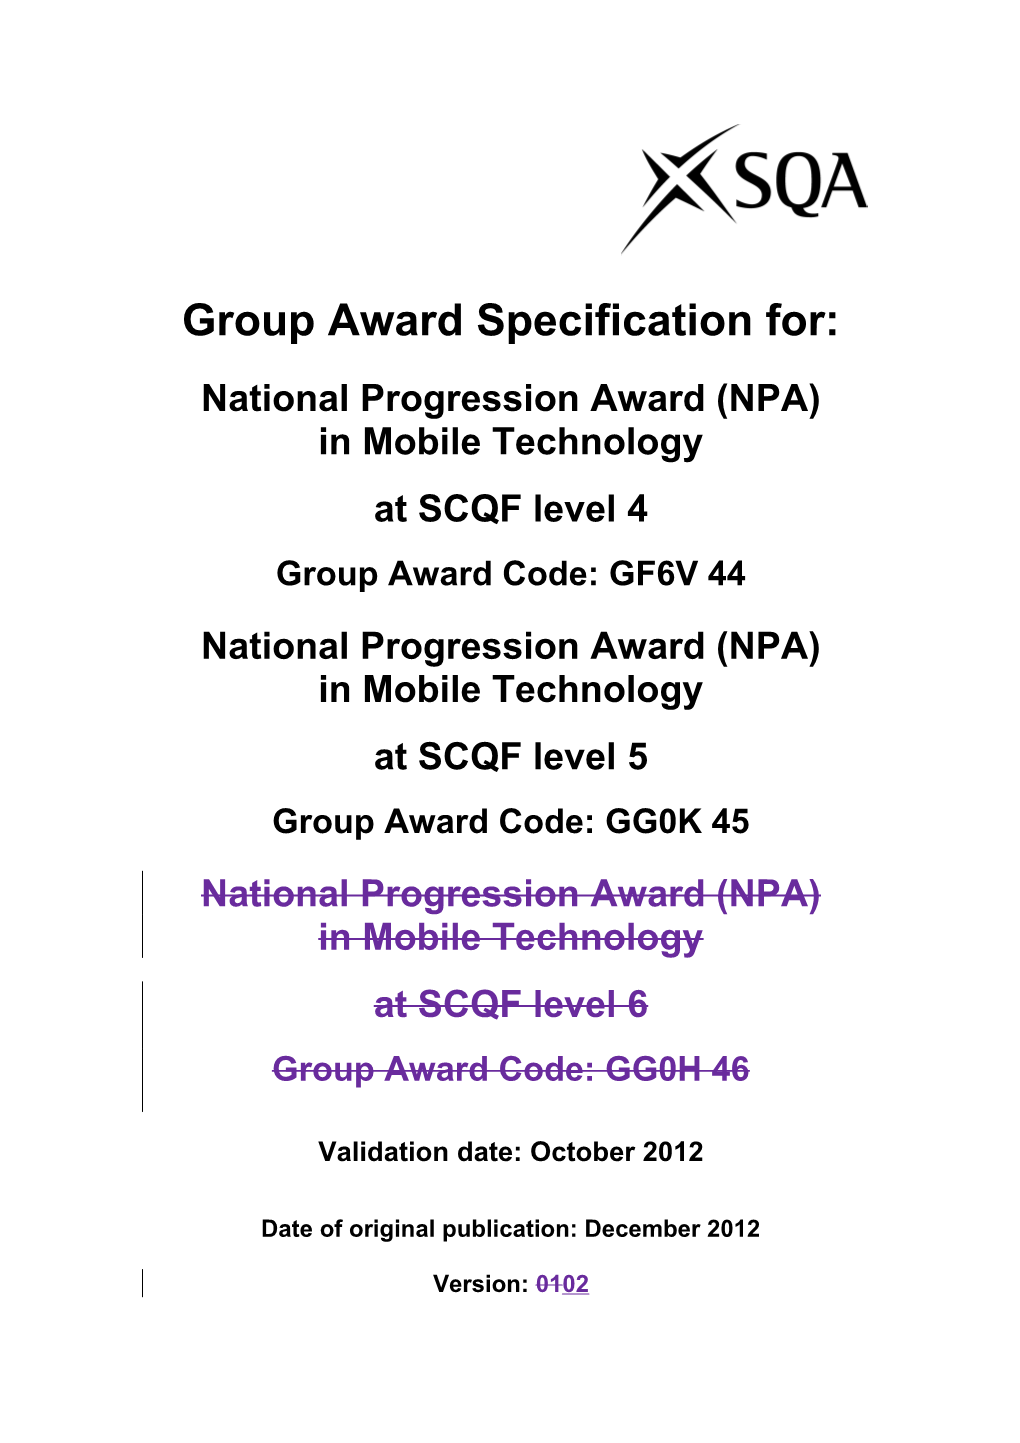 Group Award Specification For